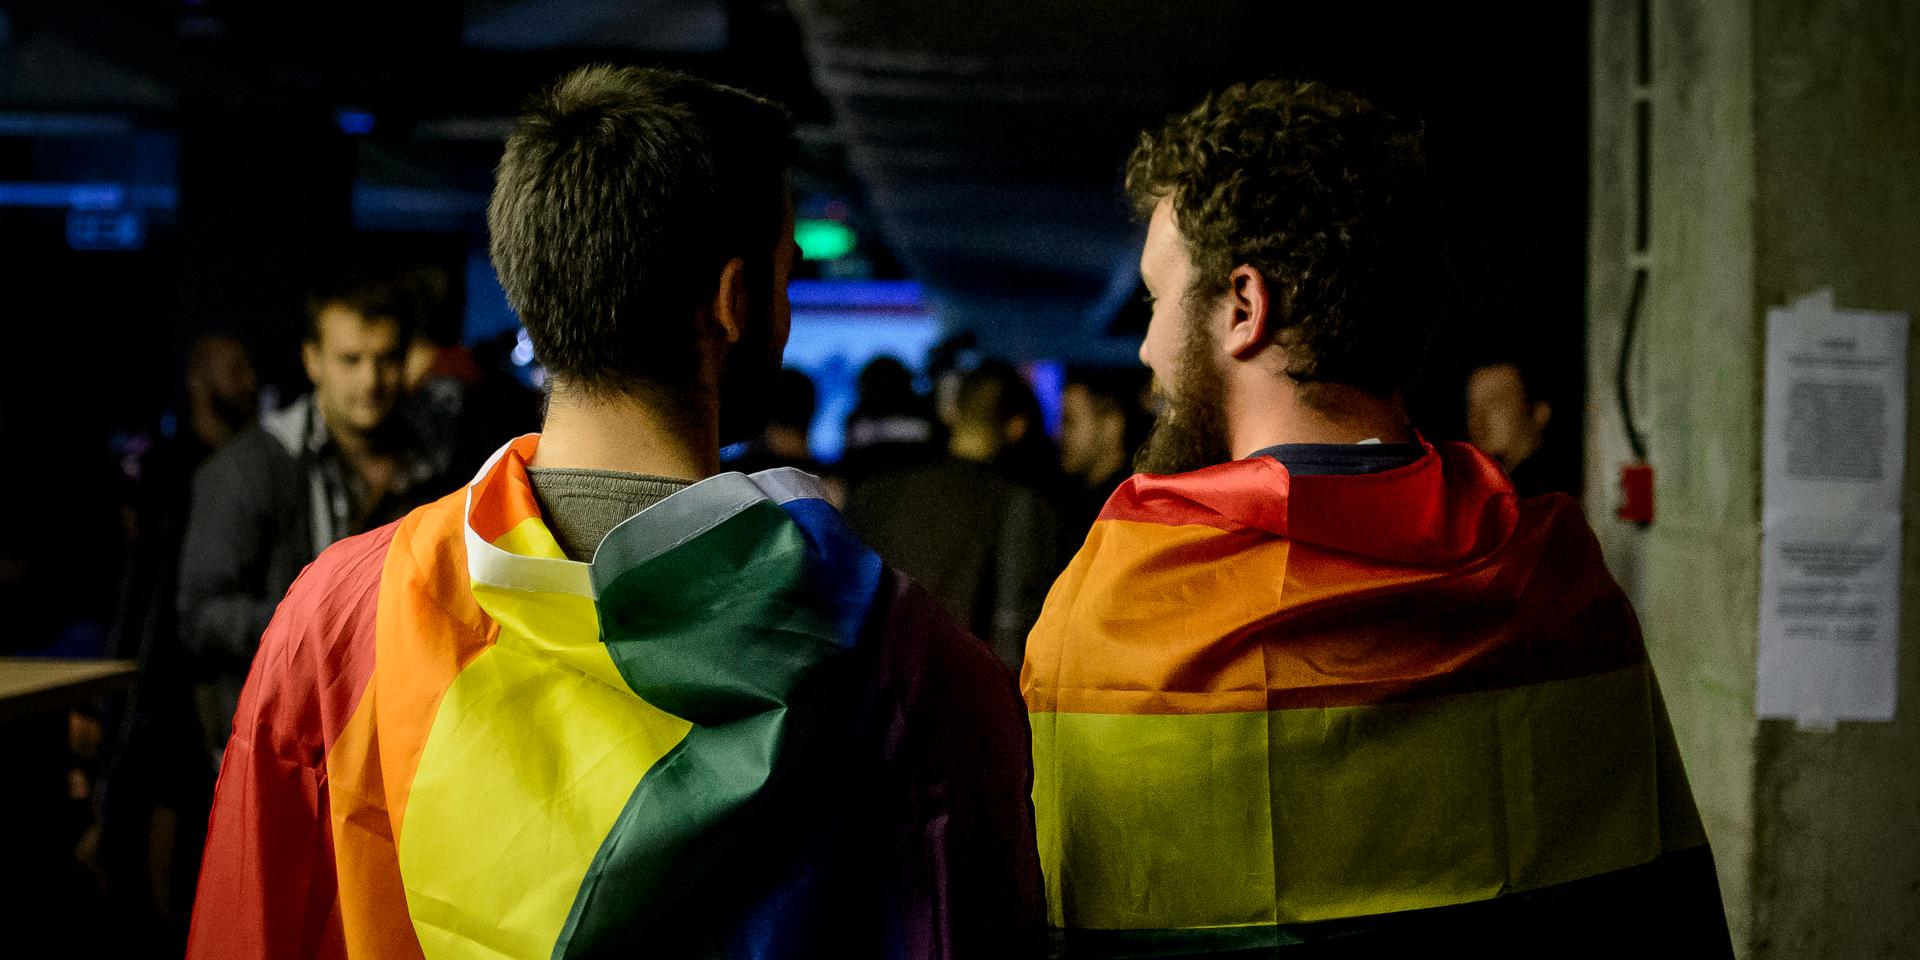 Two men draped in rainbow flags in a nightclub in Bucharest, Romania, Sunday, Oct. 7, 2018. Polls have closed in Romania after two days of voting on a constitutional amendment that would make it harder to legalize same-sex marriage. But the weekend referendum to redefine marriage failed to attract large numbers of voters and risk being voided. (AP Photo/Andreea Alexandru)